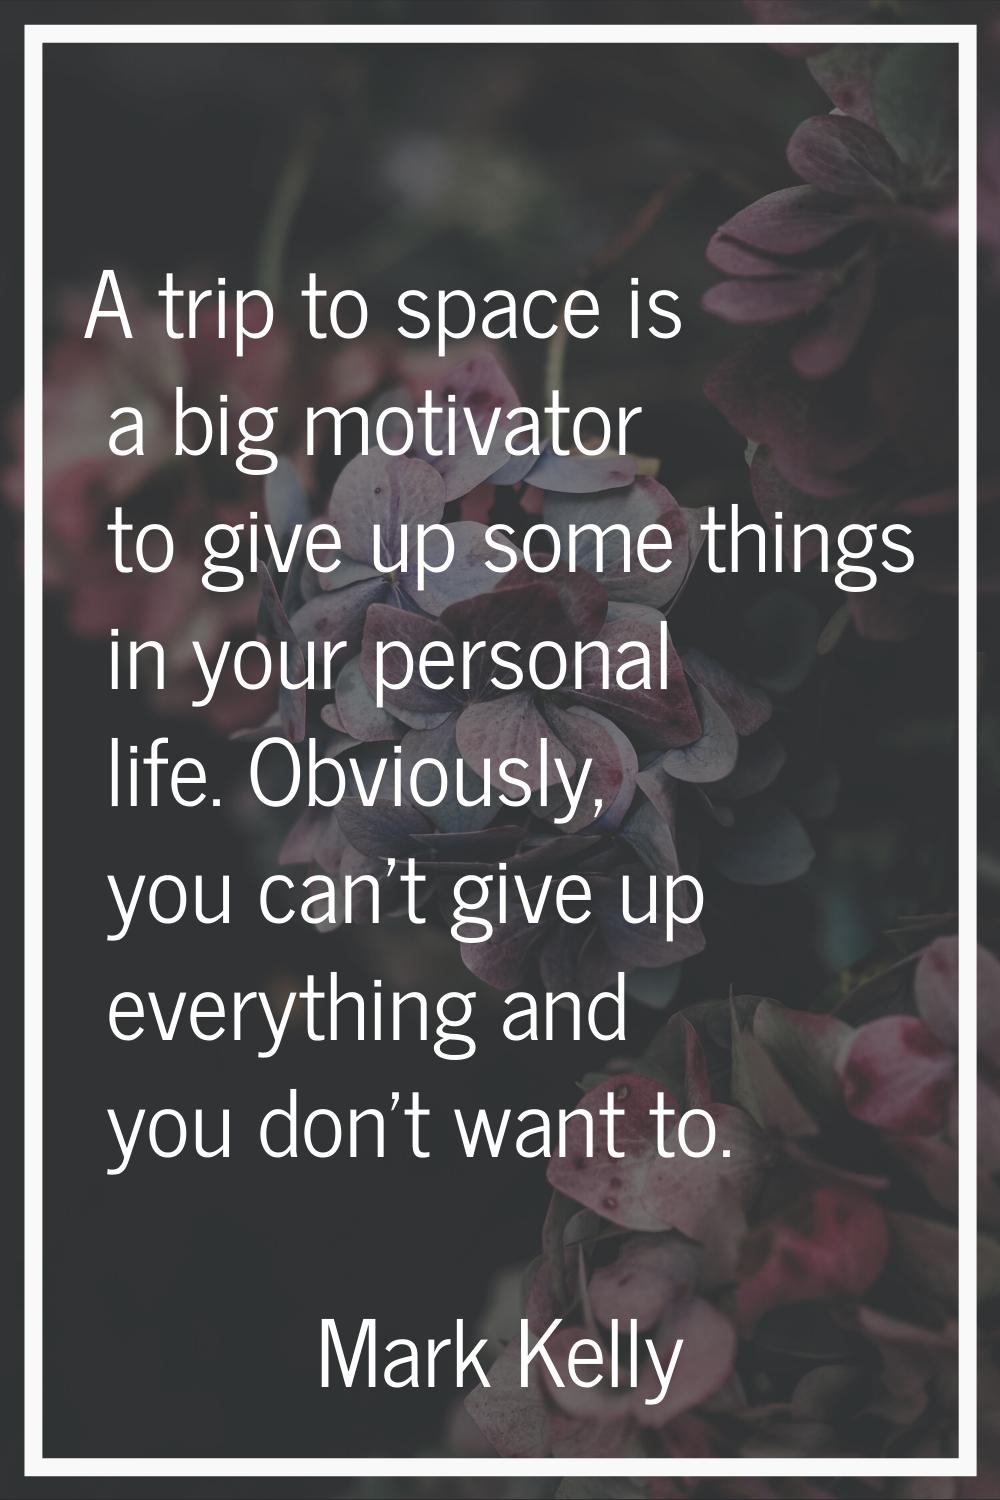 A trip to space is a big motivator to give up some things in your personal life. Obviously, you can